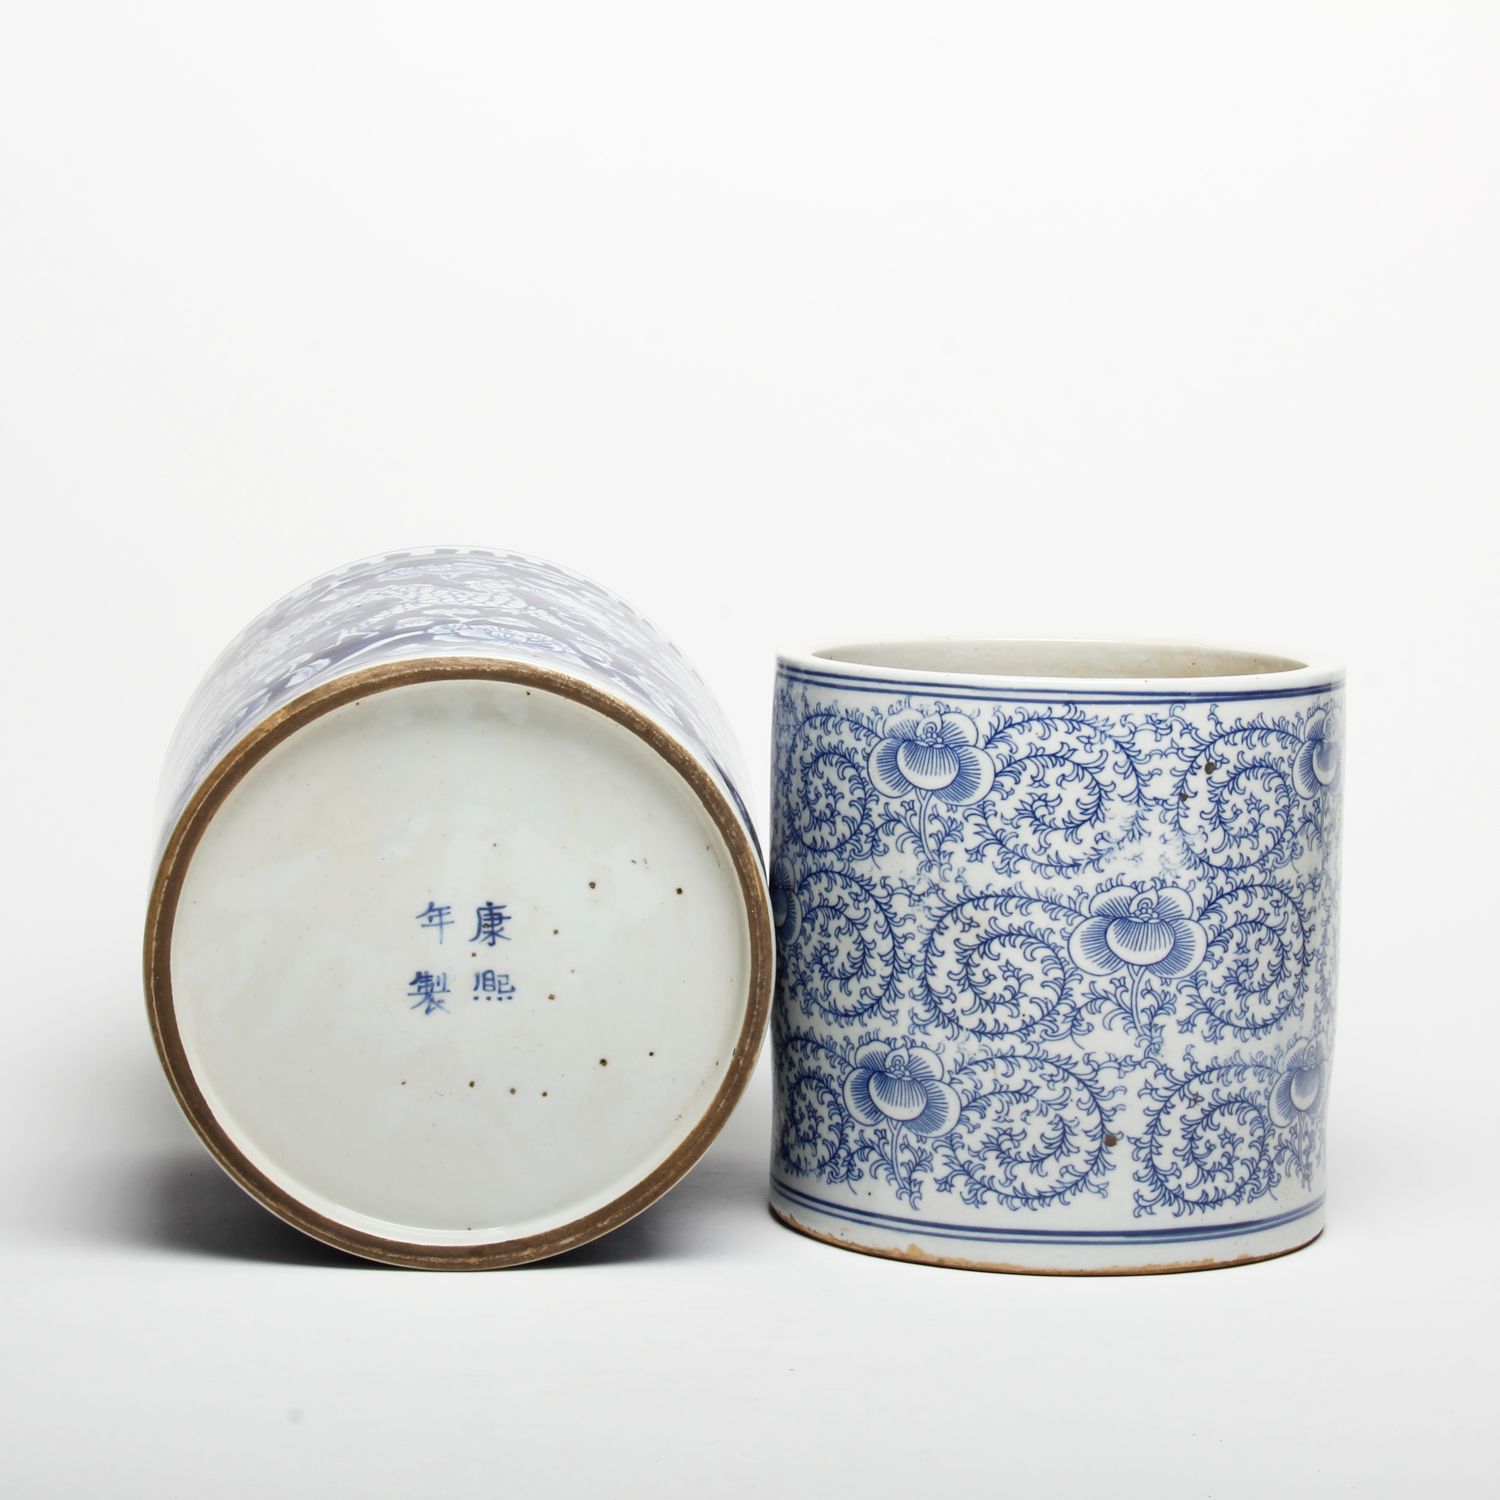 Middle Kingdom: Scrolling Peony Cachepot Product Image 4 of 4